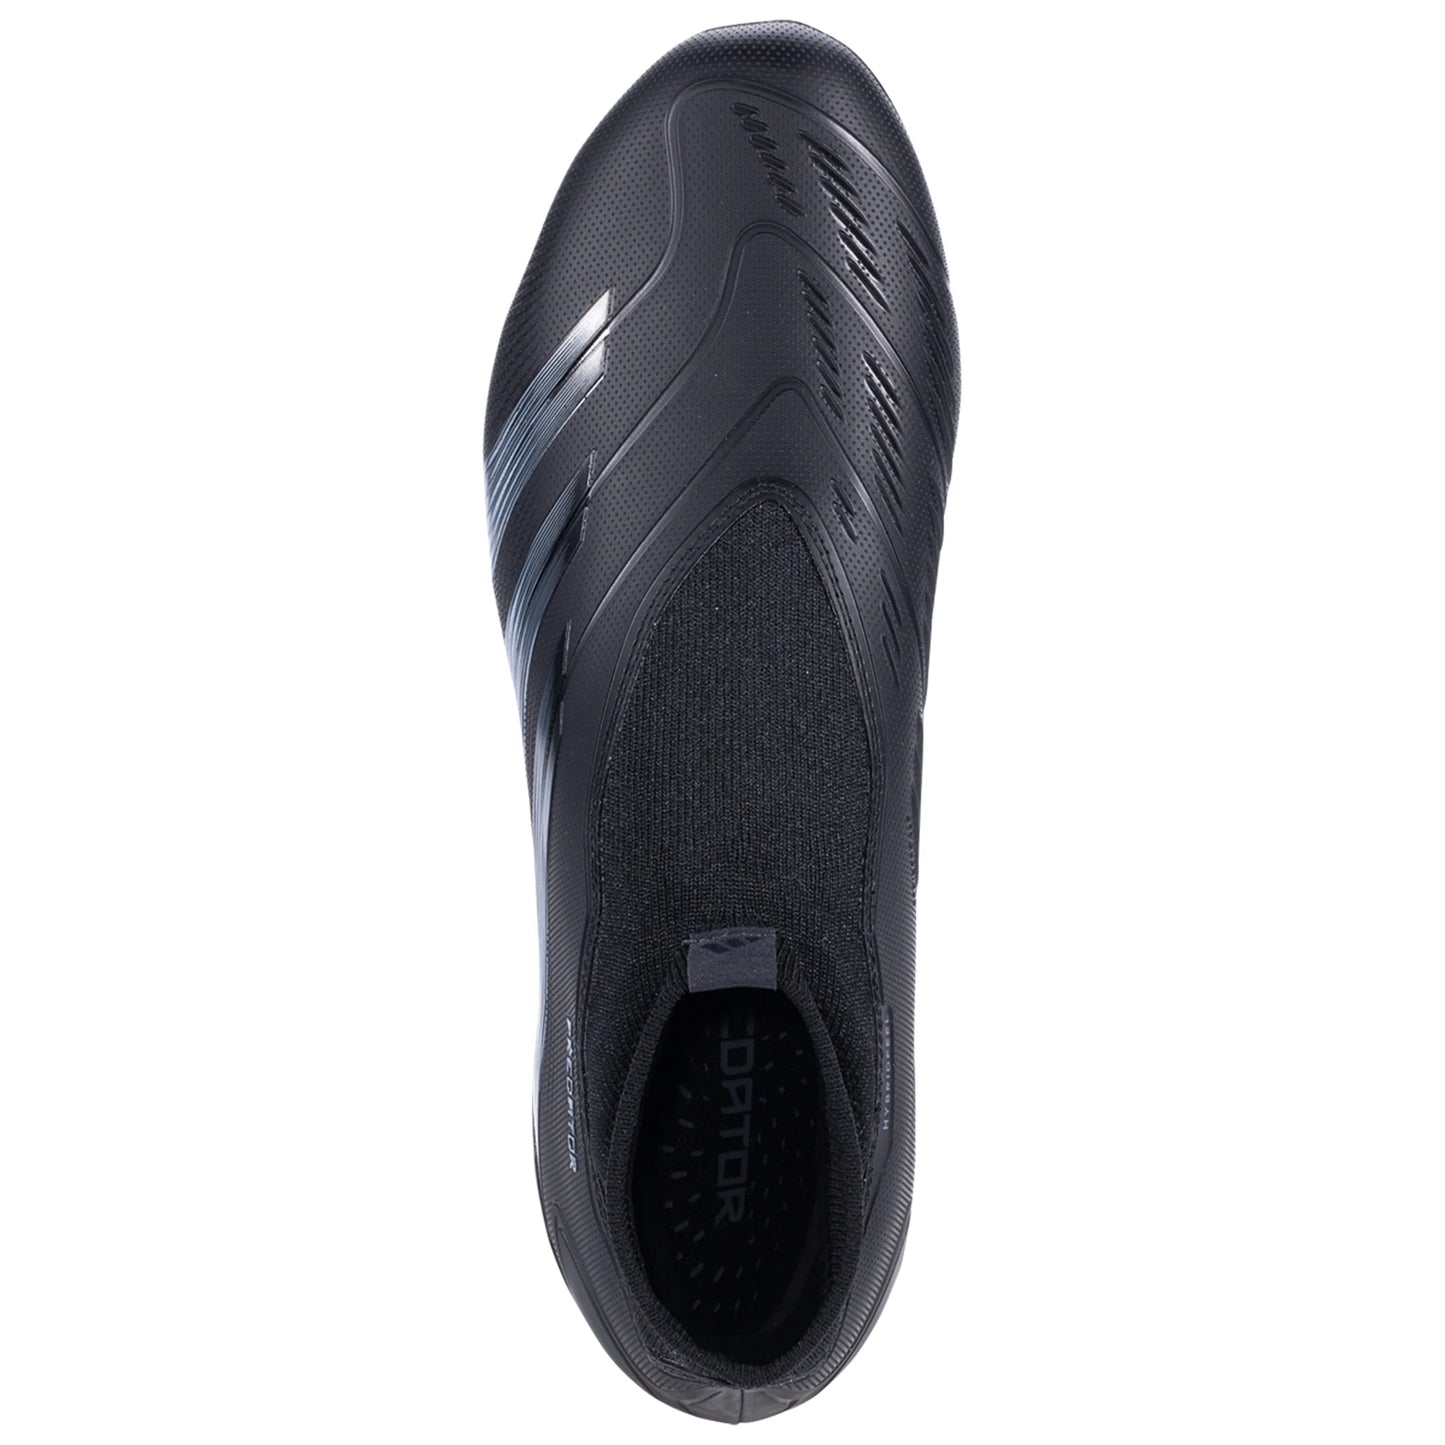 Adidas Predator League Laceless FG Firm Ground Soccer Cleat